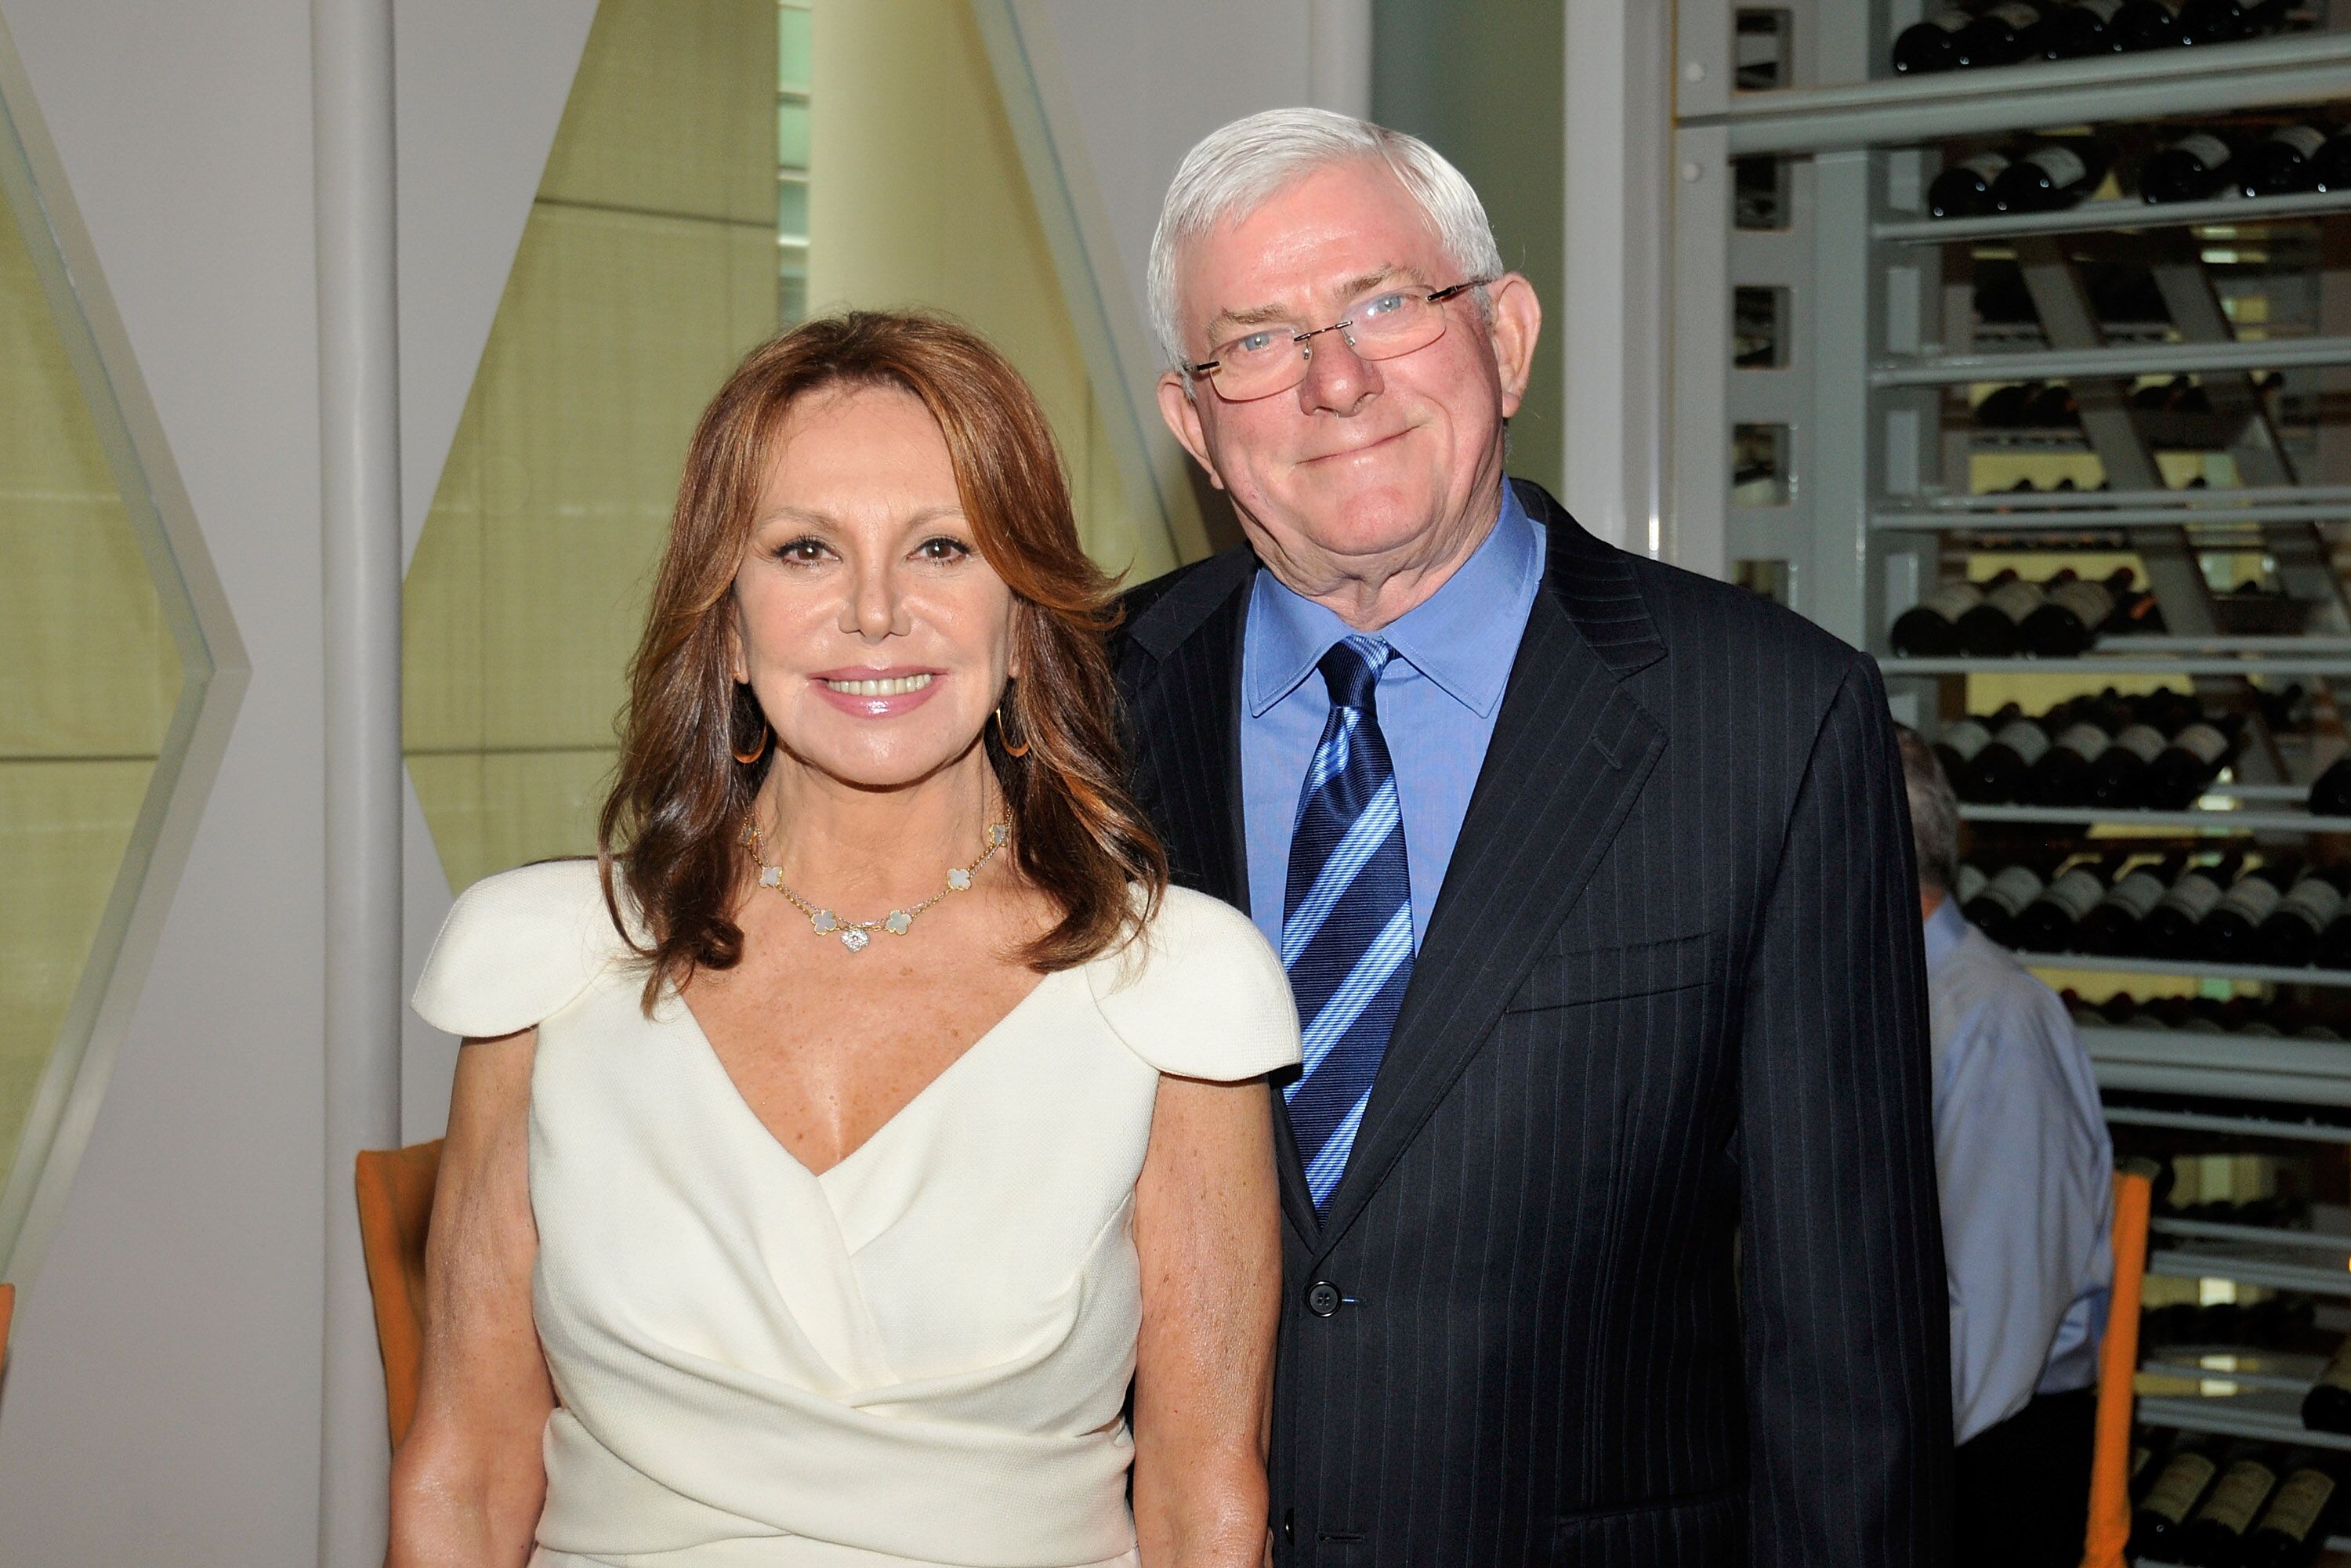 Marlo Thomas and Phil Donahue attend the 2011 Jefferson Awards for Public Service. | Source: Getty Images